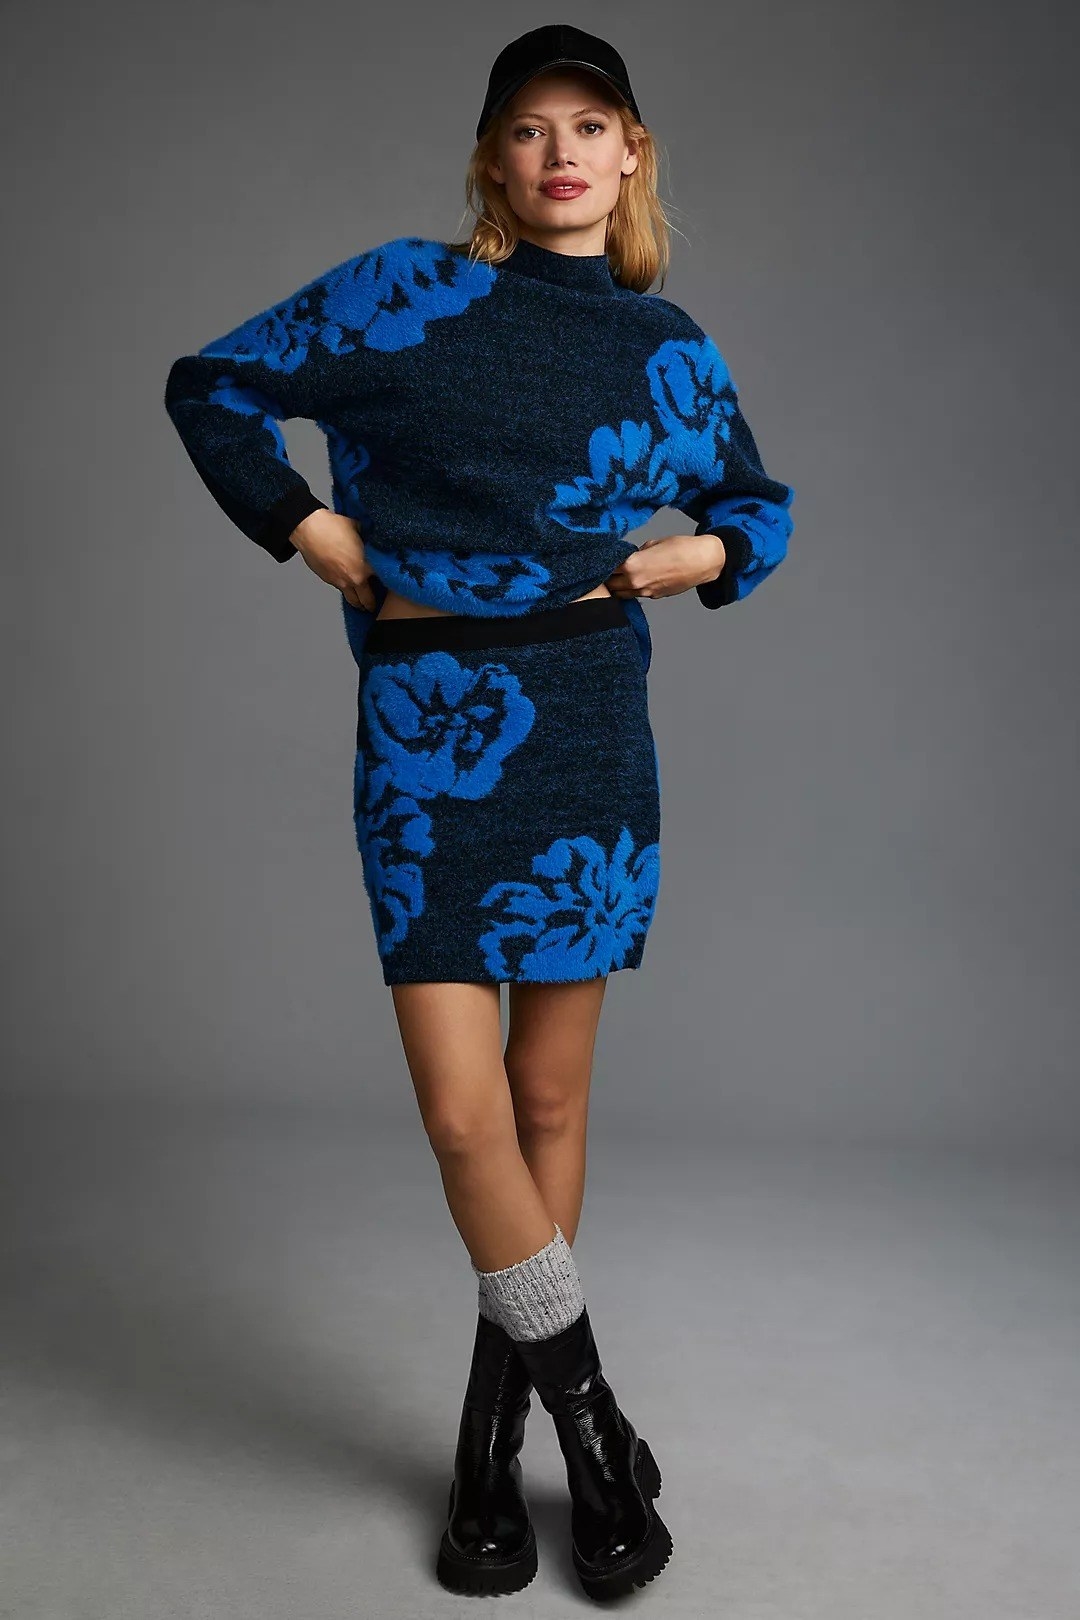 model wearing the blue sweater set with socks and black boots